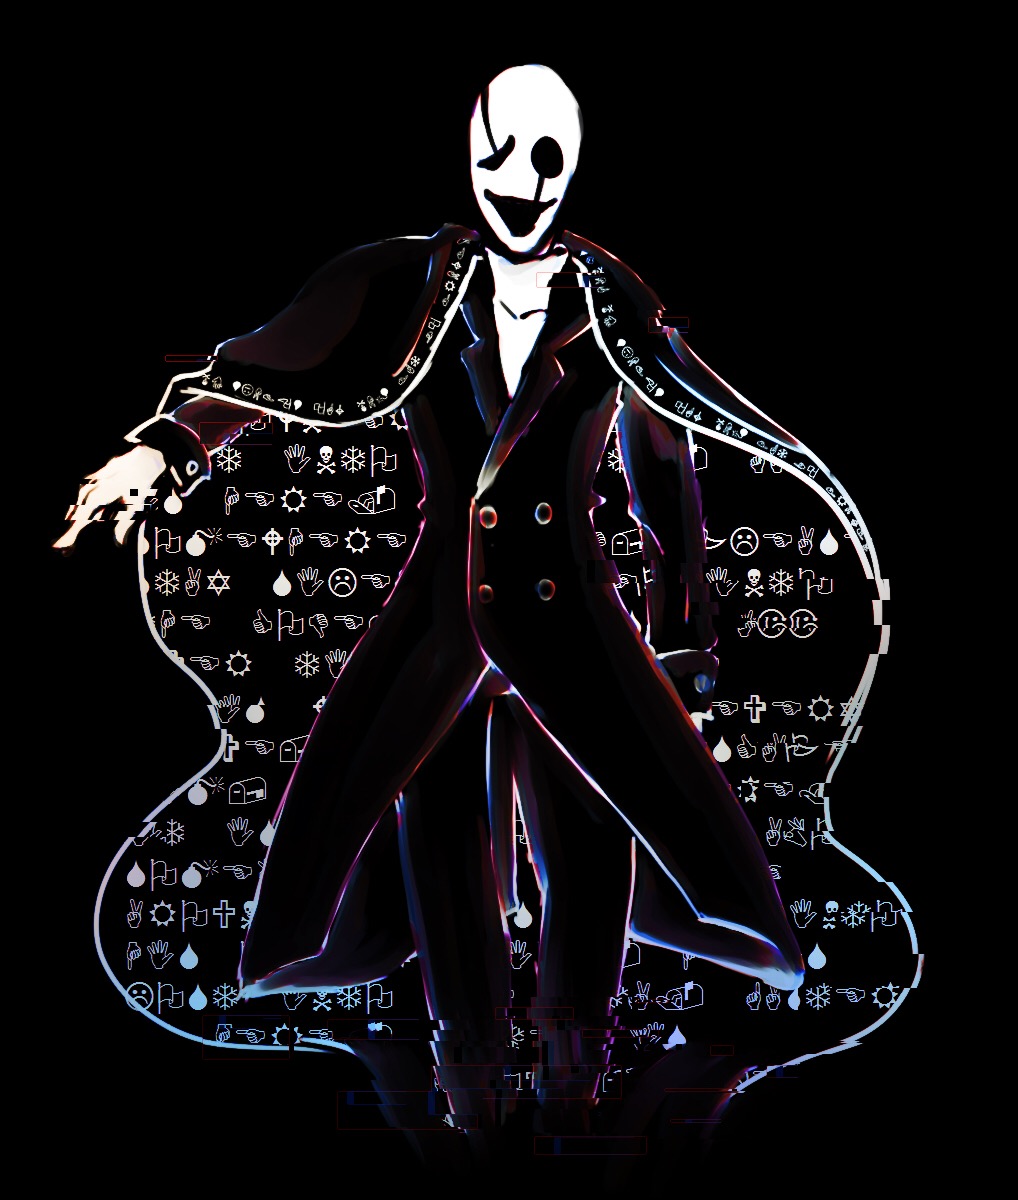 This visual is about gaster undertale #gaster #undertale.